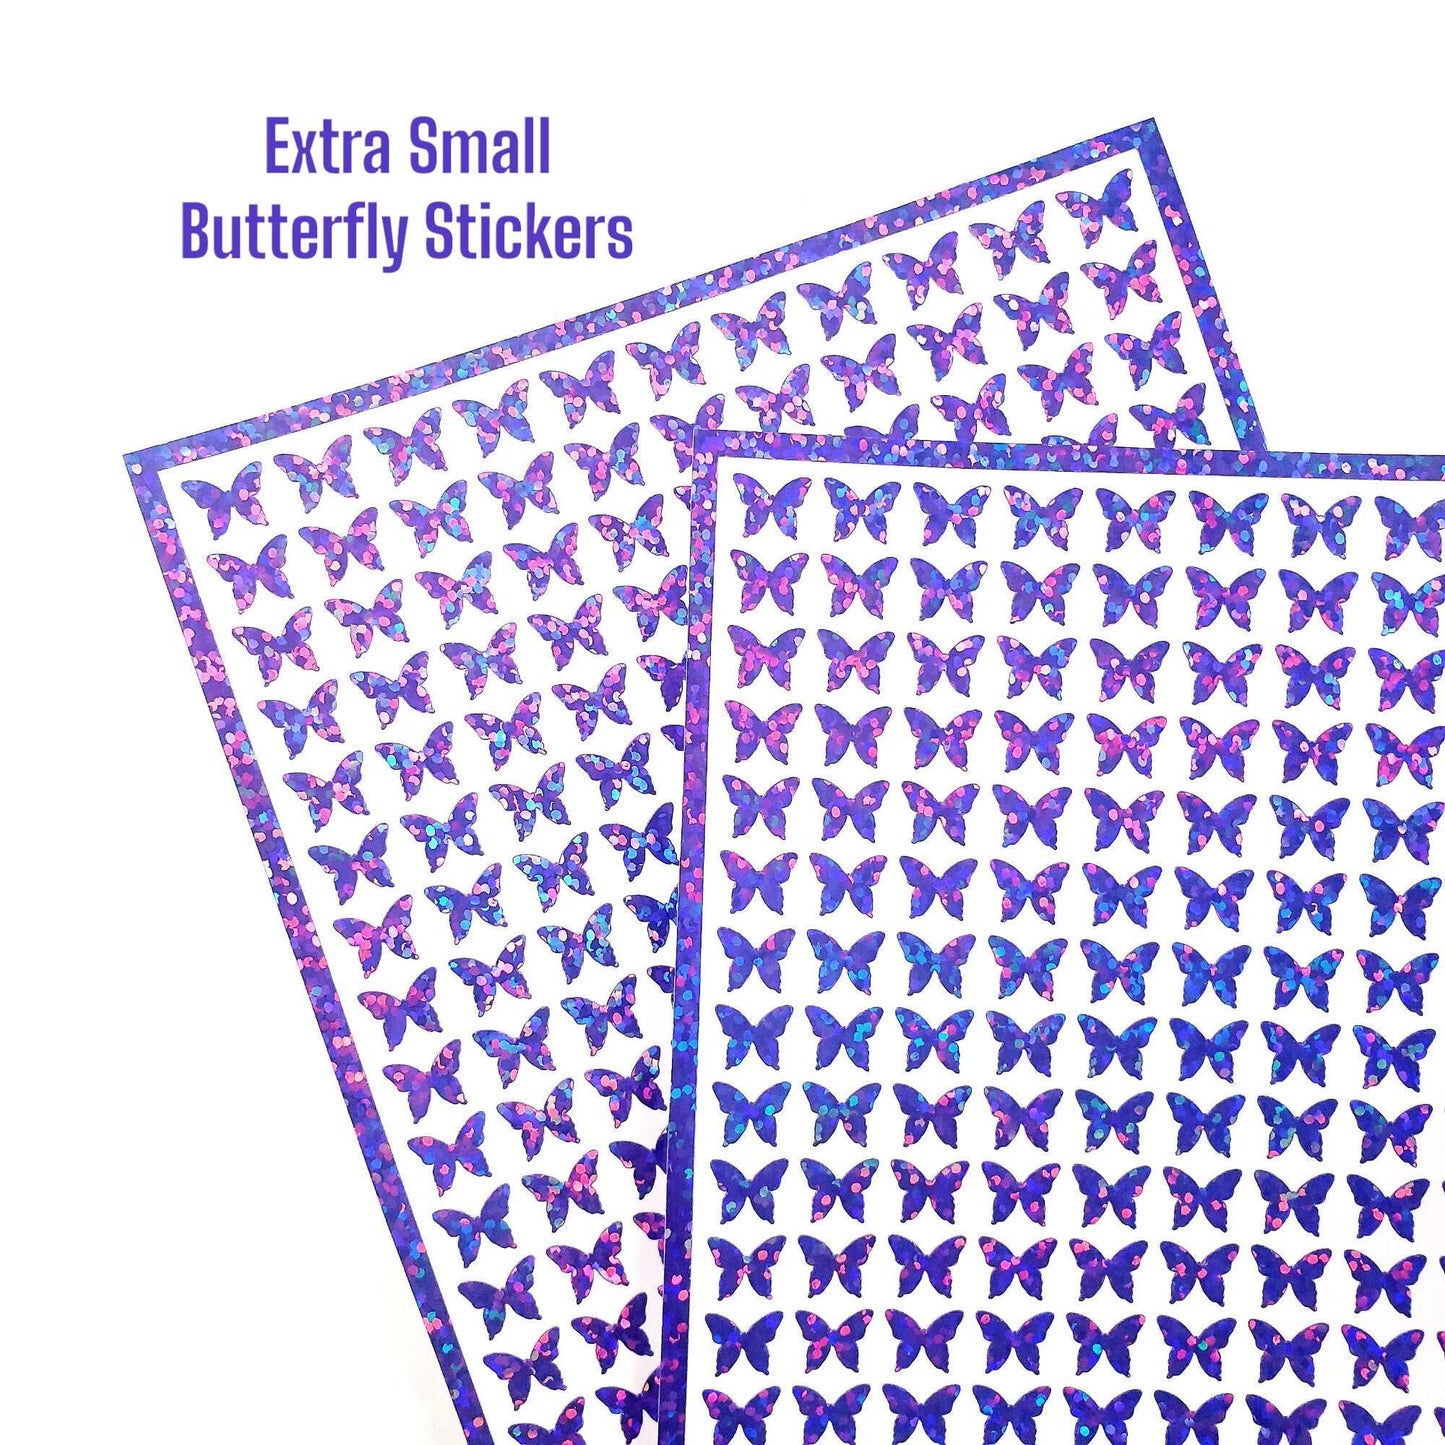 Purple Butterfly Stickers Sheet, set of 209 extra small glitter butterflies for scrapbook pages, journals, notebooks and craft projects.